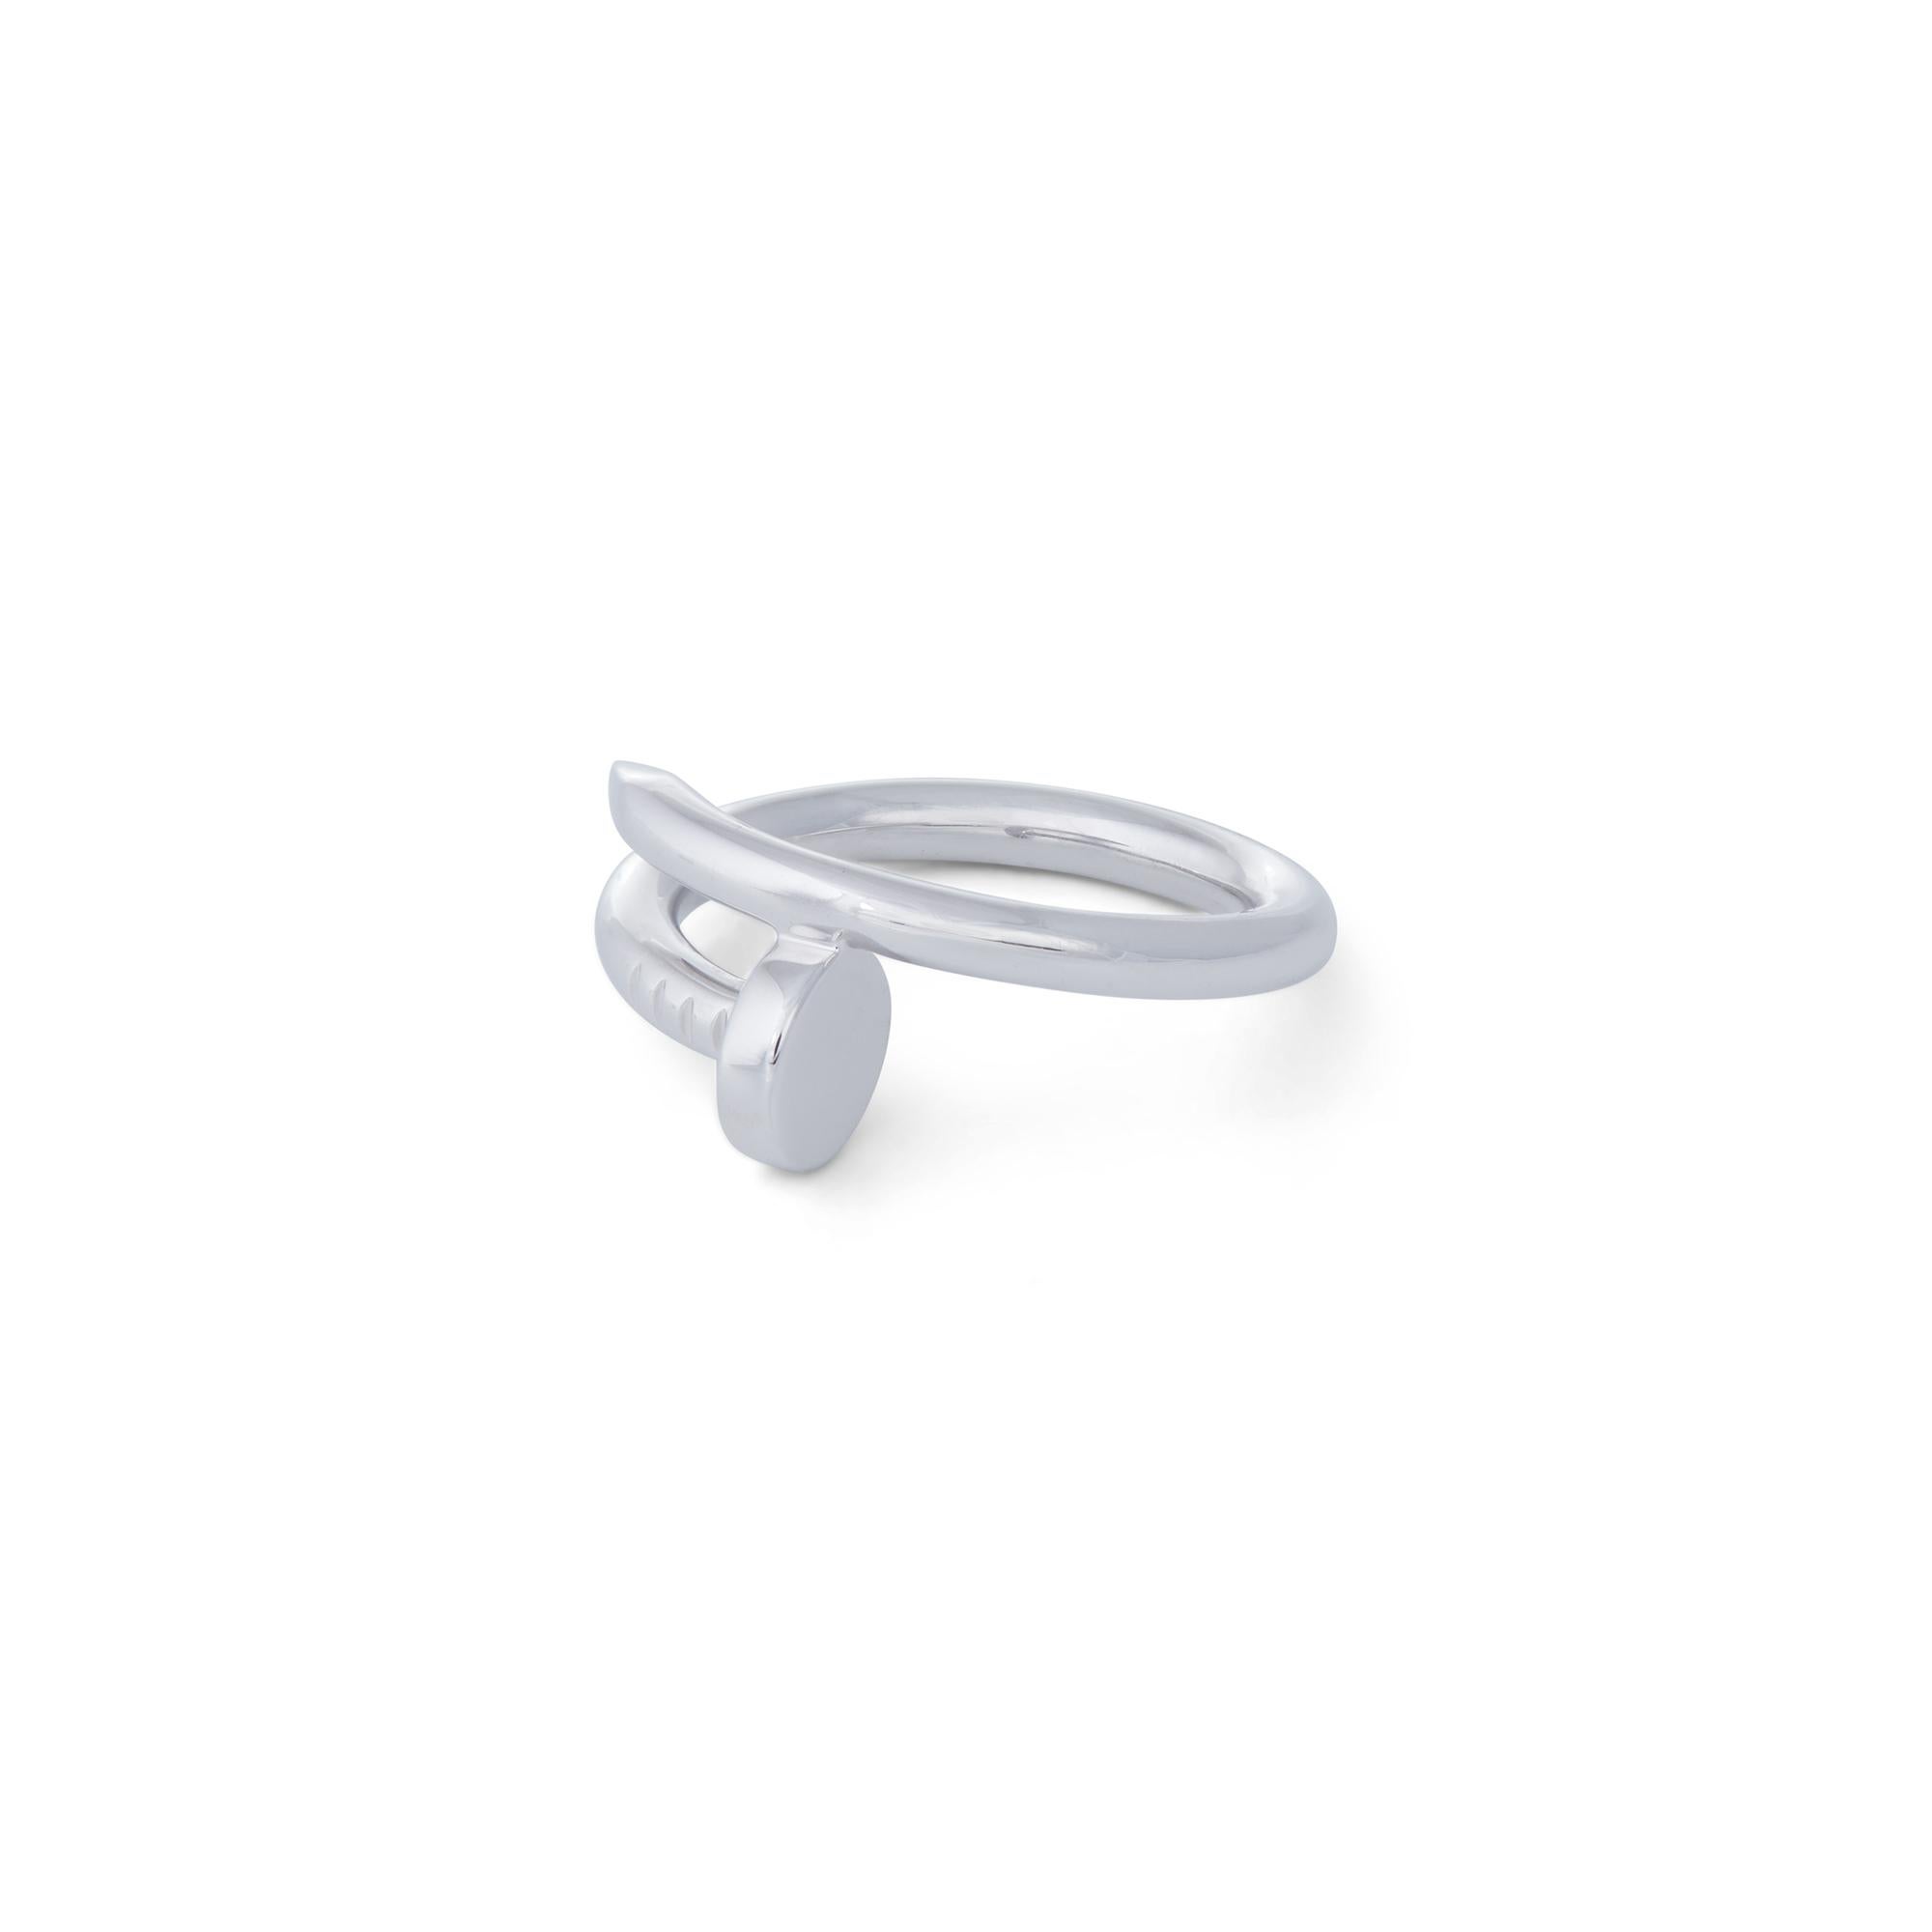 Designed as a 'just a nail', this authentic Cartier 'Juste un Clou' ring is modern, transcending the every day, yet bold. The nail ring is an innovative twist on a familiar and ordinary object. Size 56 (US 7.5), 2.65mm wide. Signed Cartier, 56,